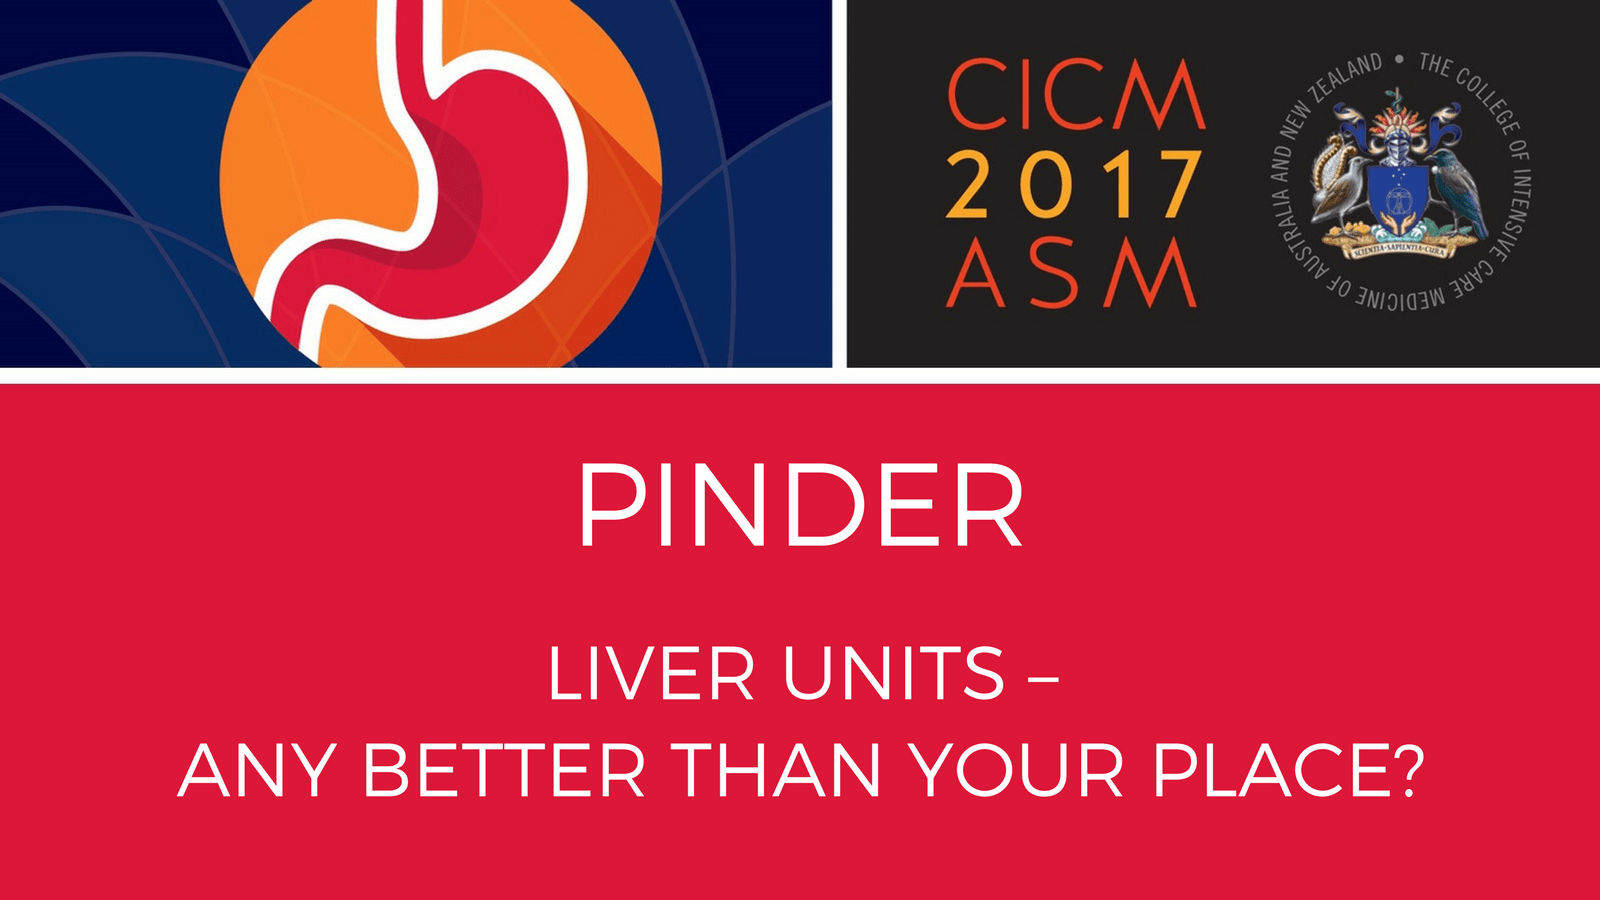 Liver units – any better than your place?